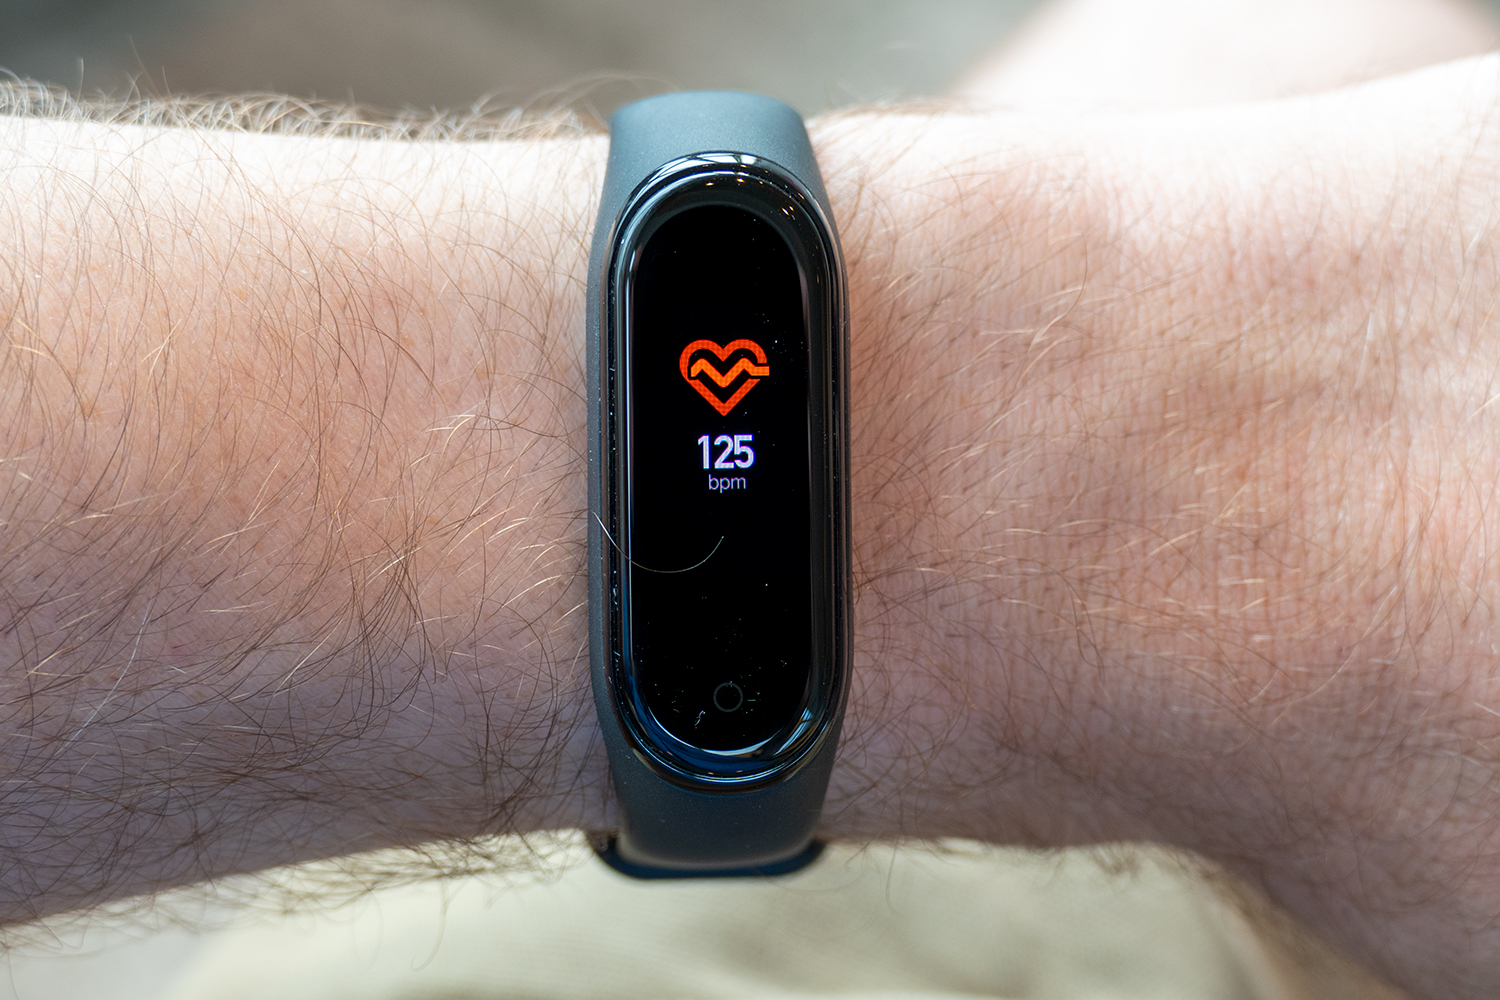 Xiaomi Mi Smart Band 4 - Fitness Tracker with Heart Rate Monitor